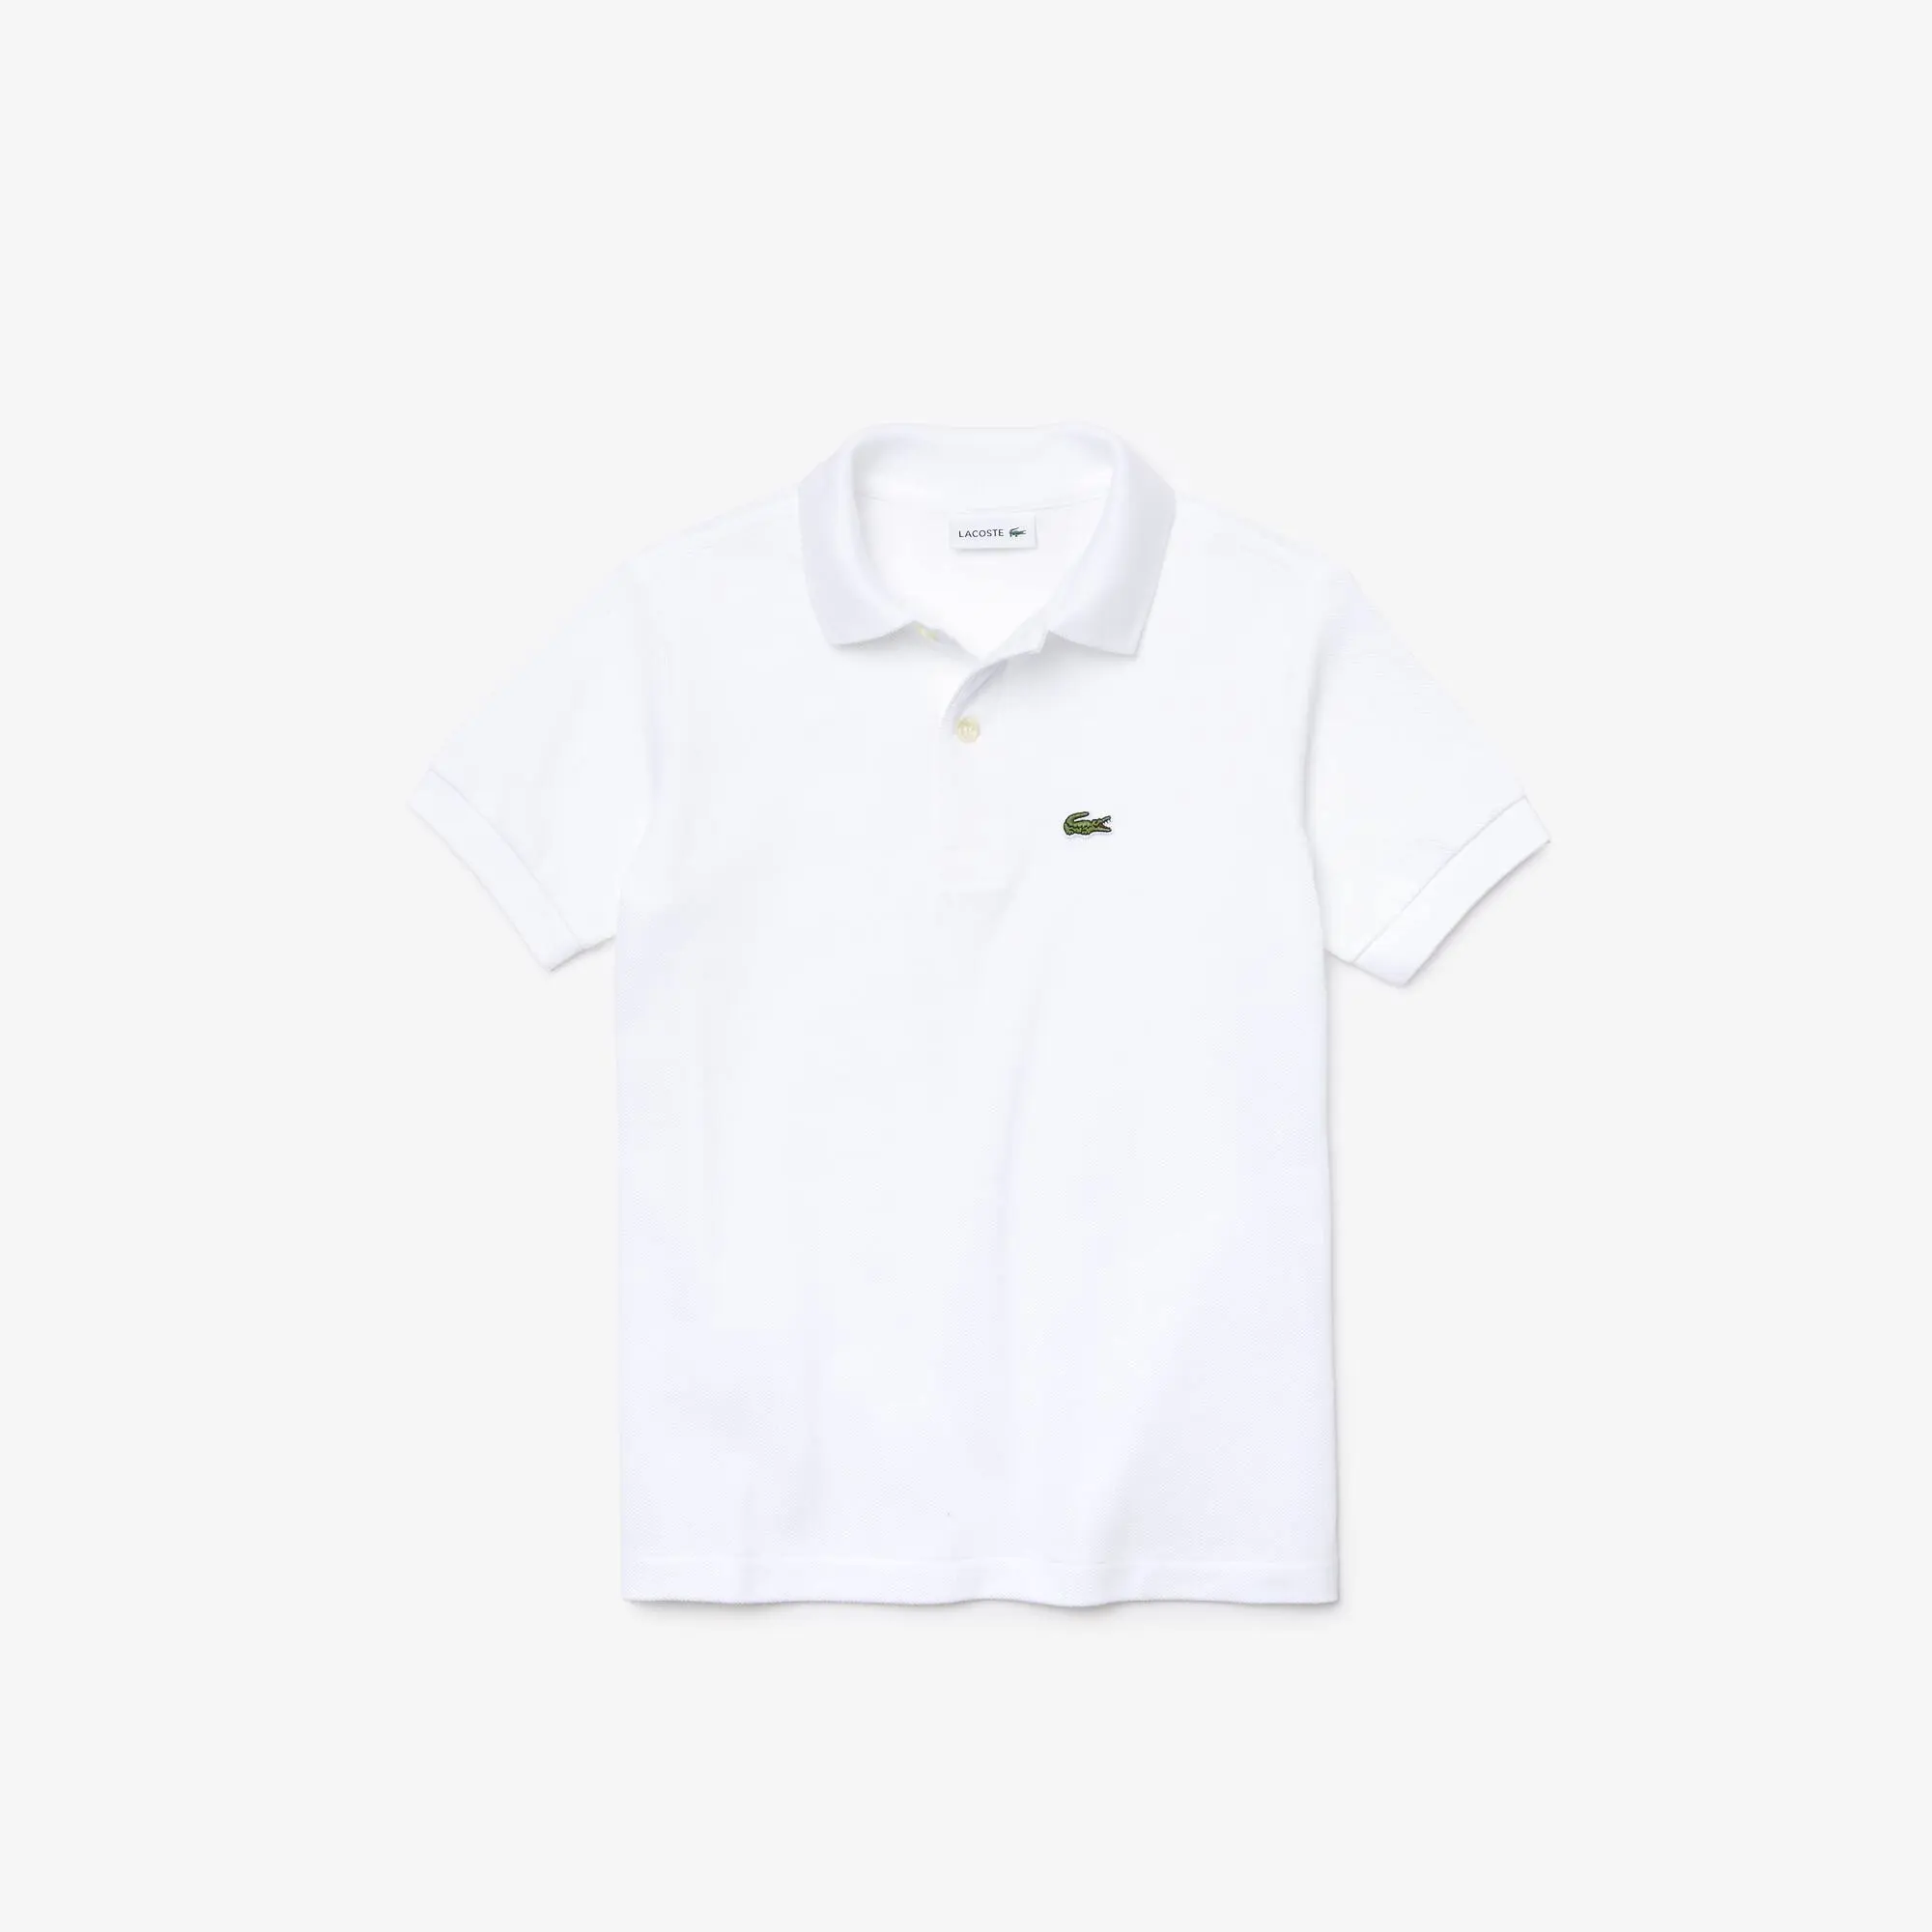 Lacoste Individuelles Lacoste Kinder Polo. 2